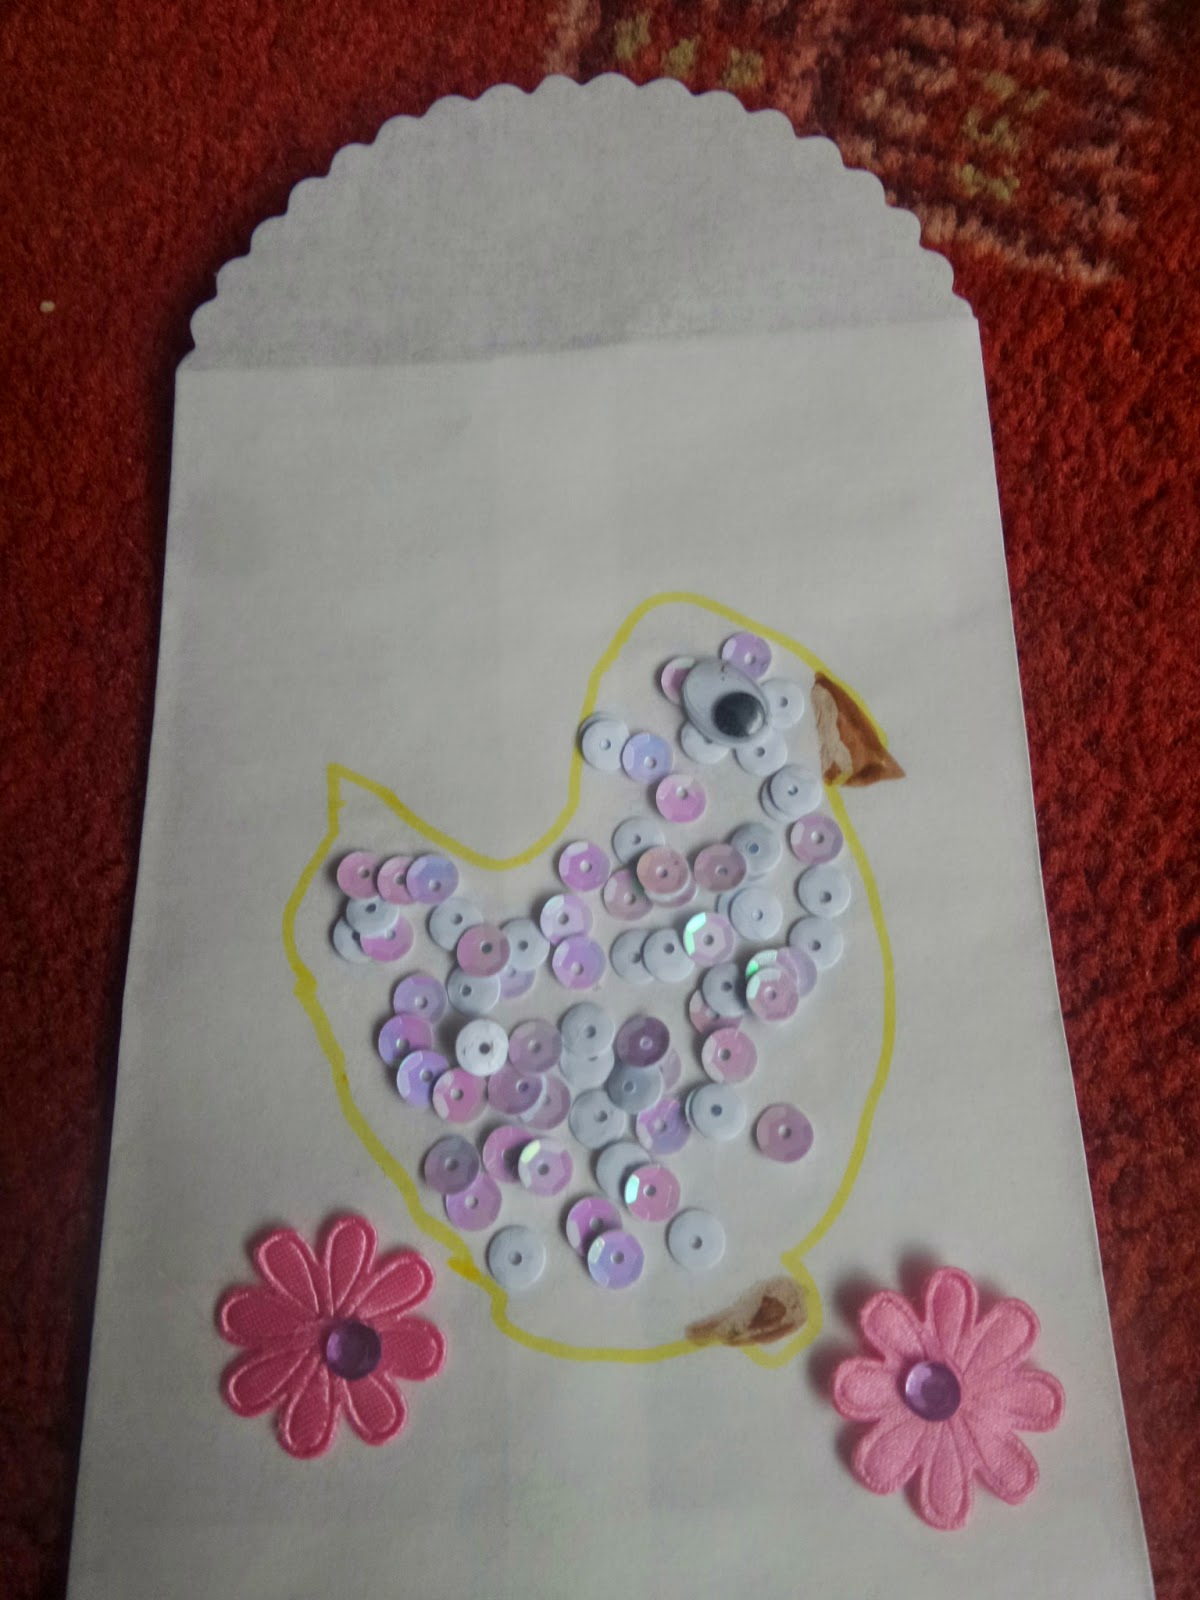 A sequined Chick on an envelope